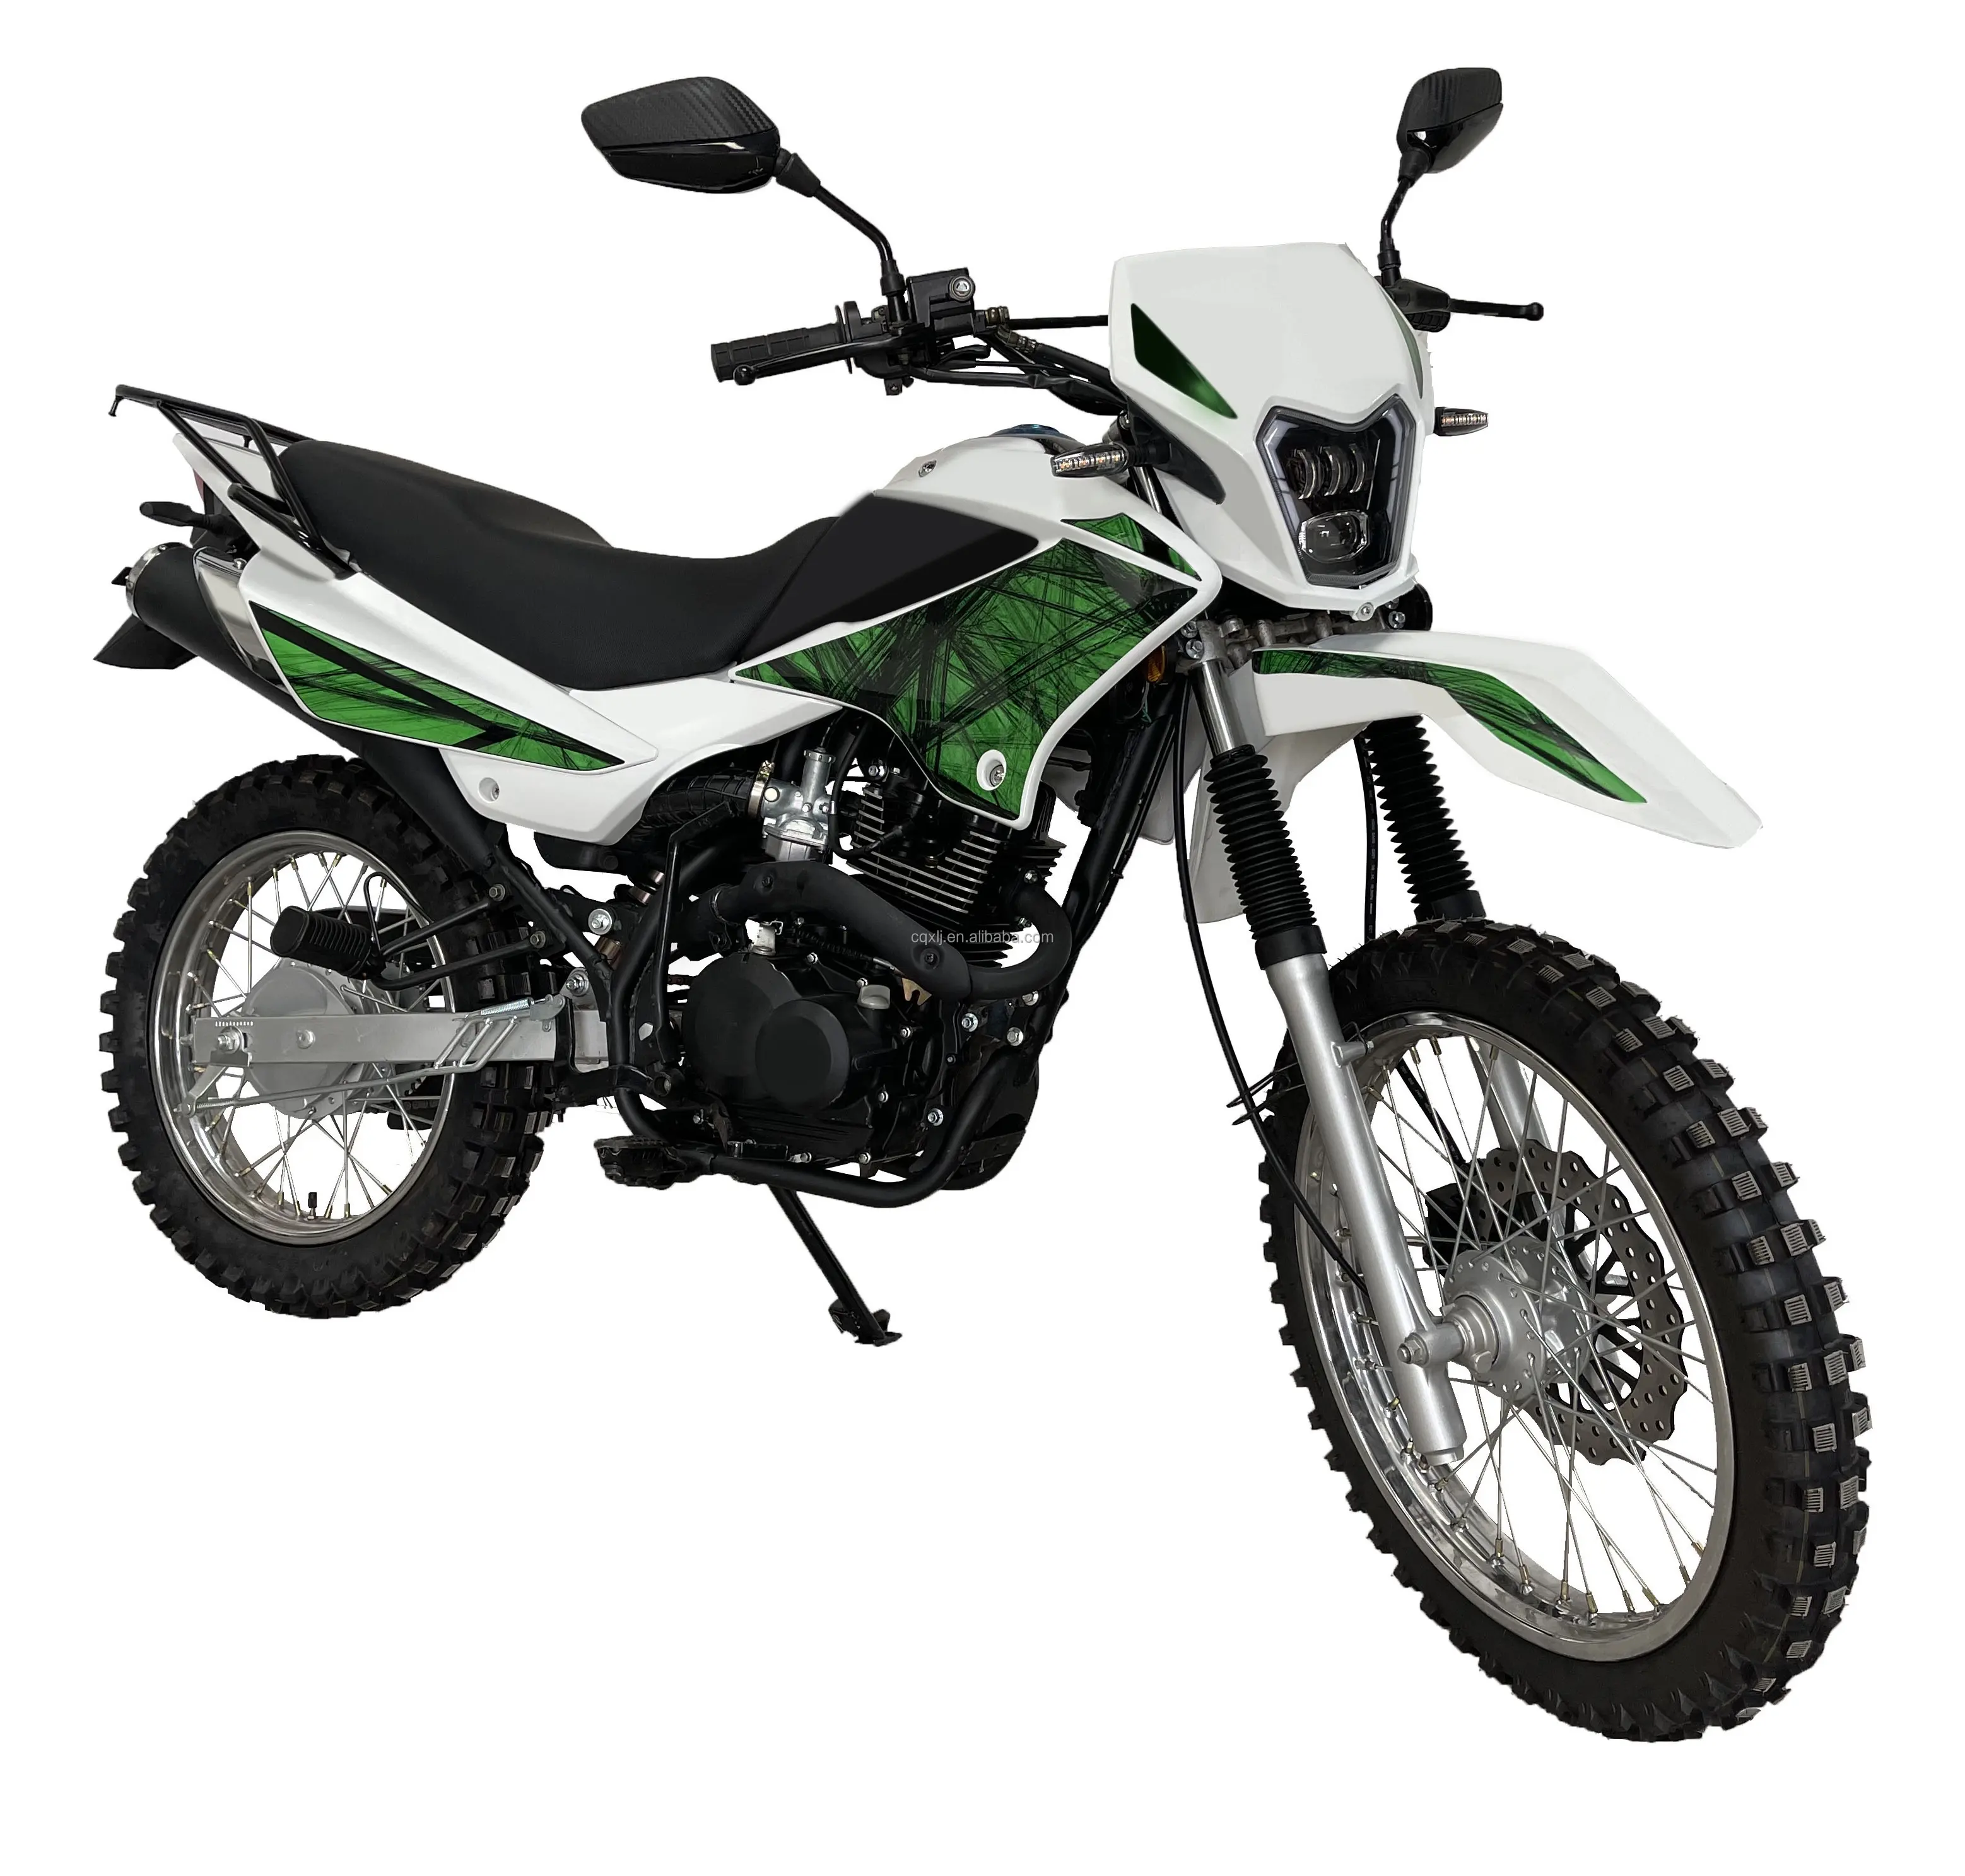 Lextra Classic150cc 200cc 250cc 4 stroke dirt bike 250cc on Road and Off Road motorcycles